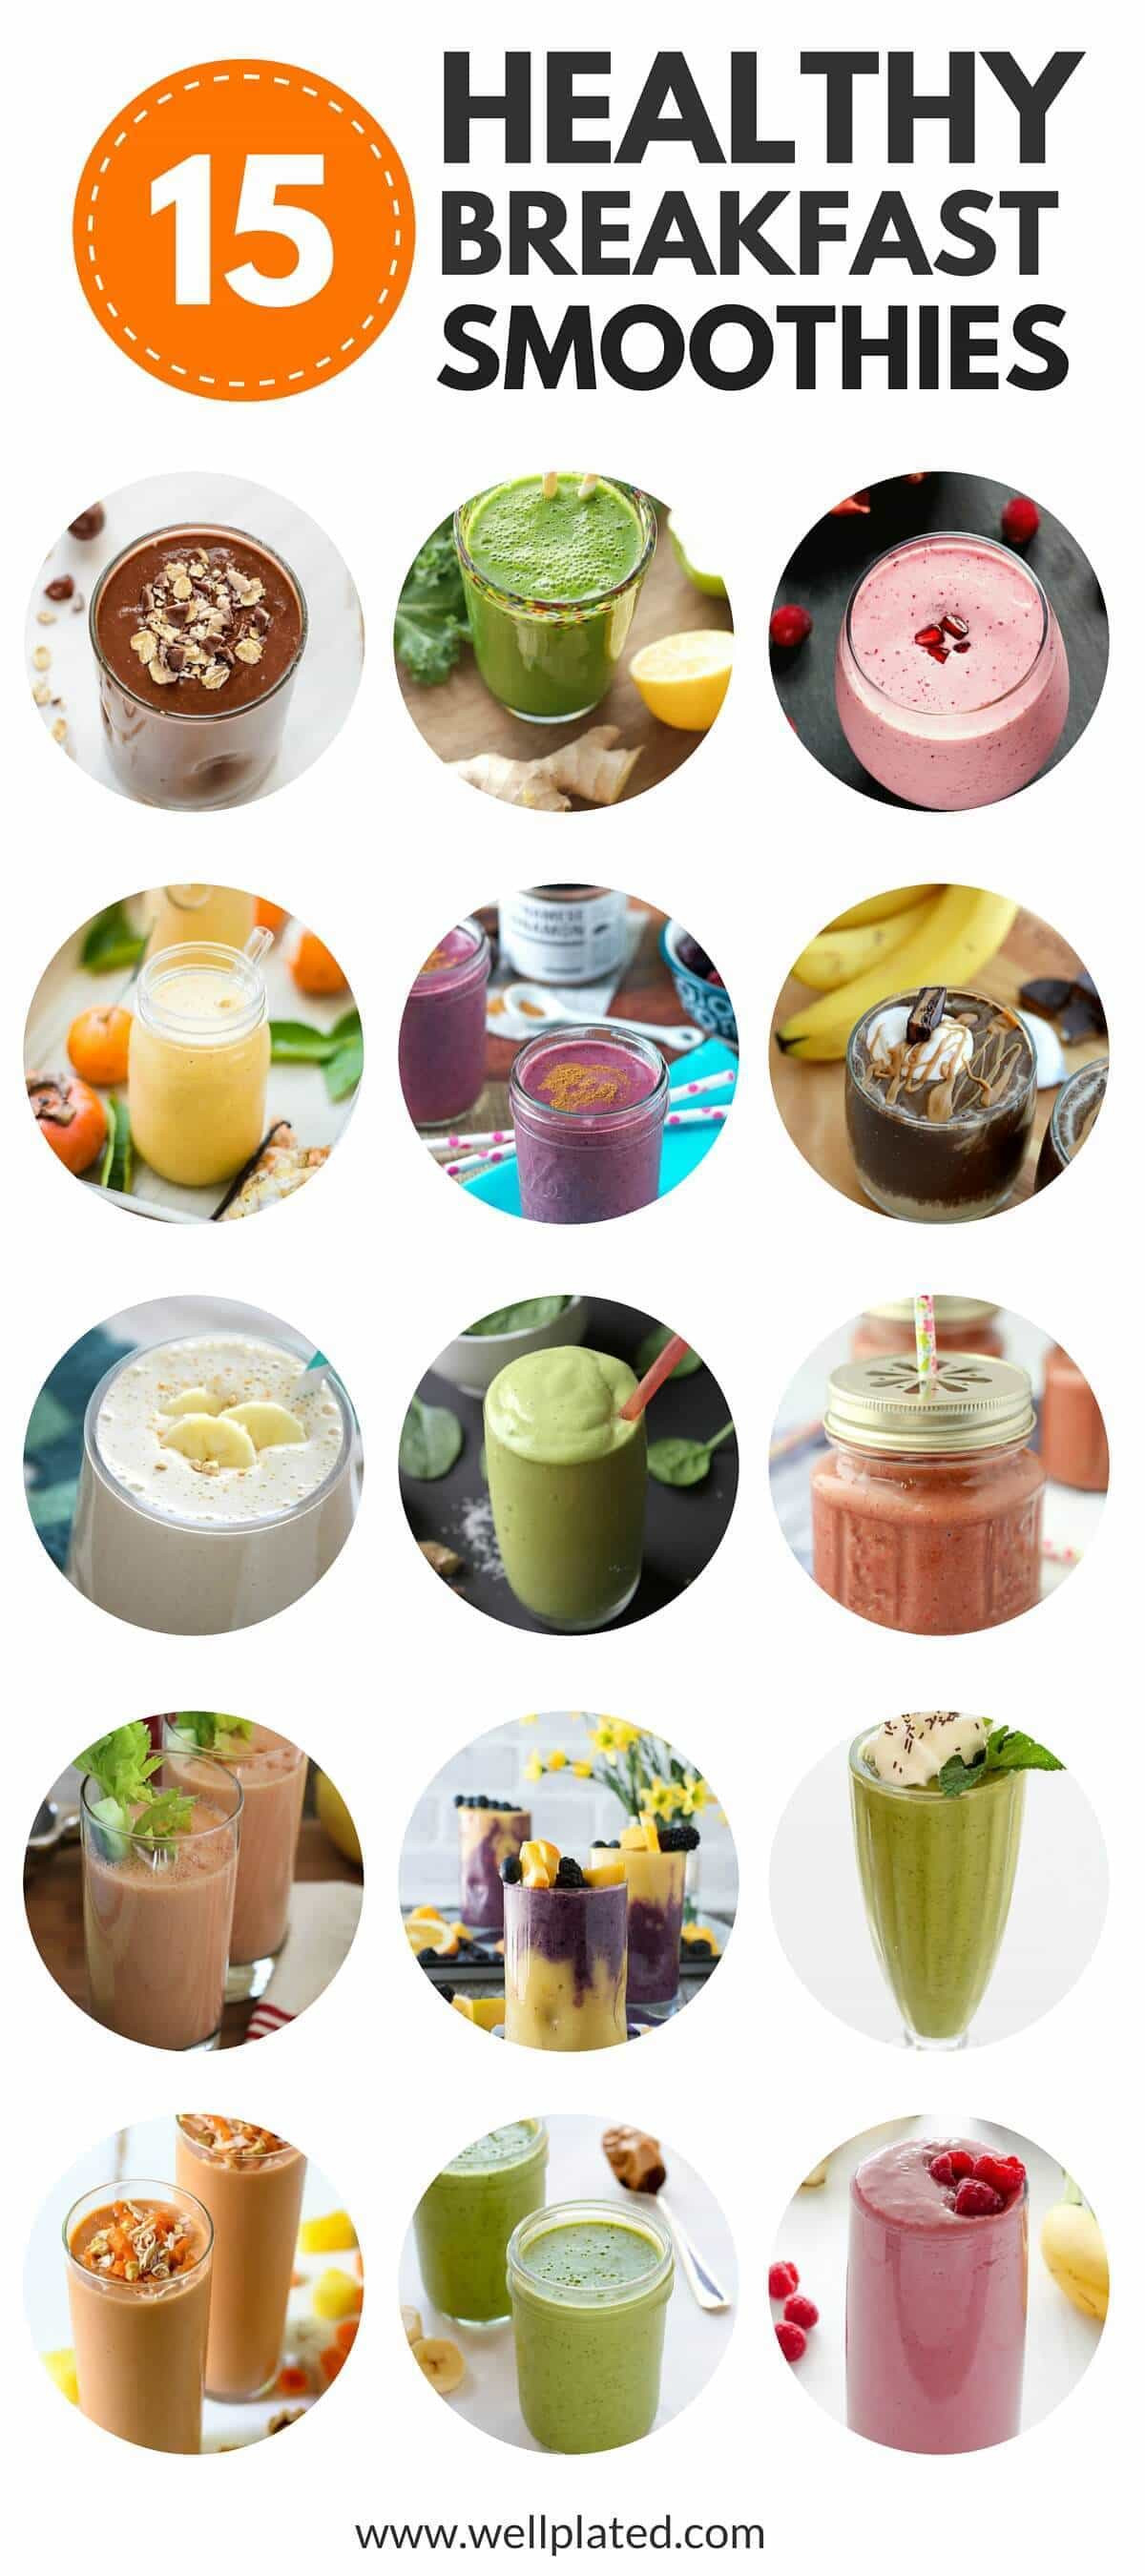 Healthy Fruit Smoothie Recipes
 The Best 15 Healthy Breakfast Smoothies